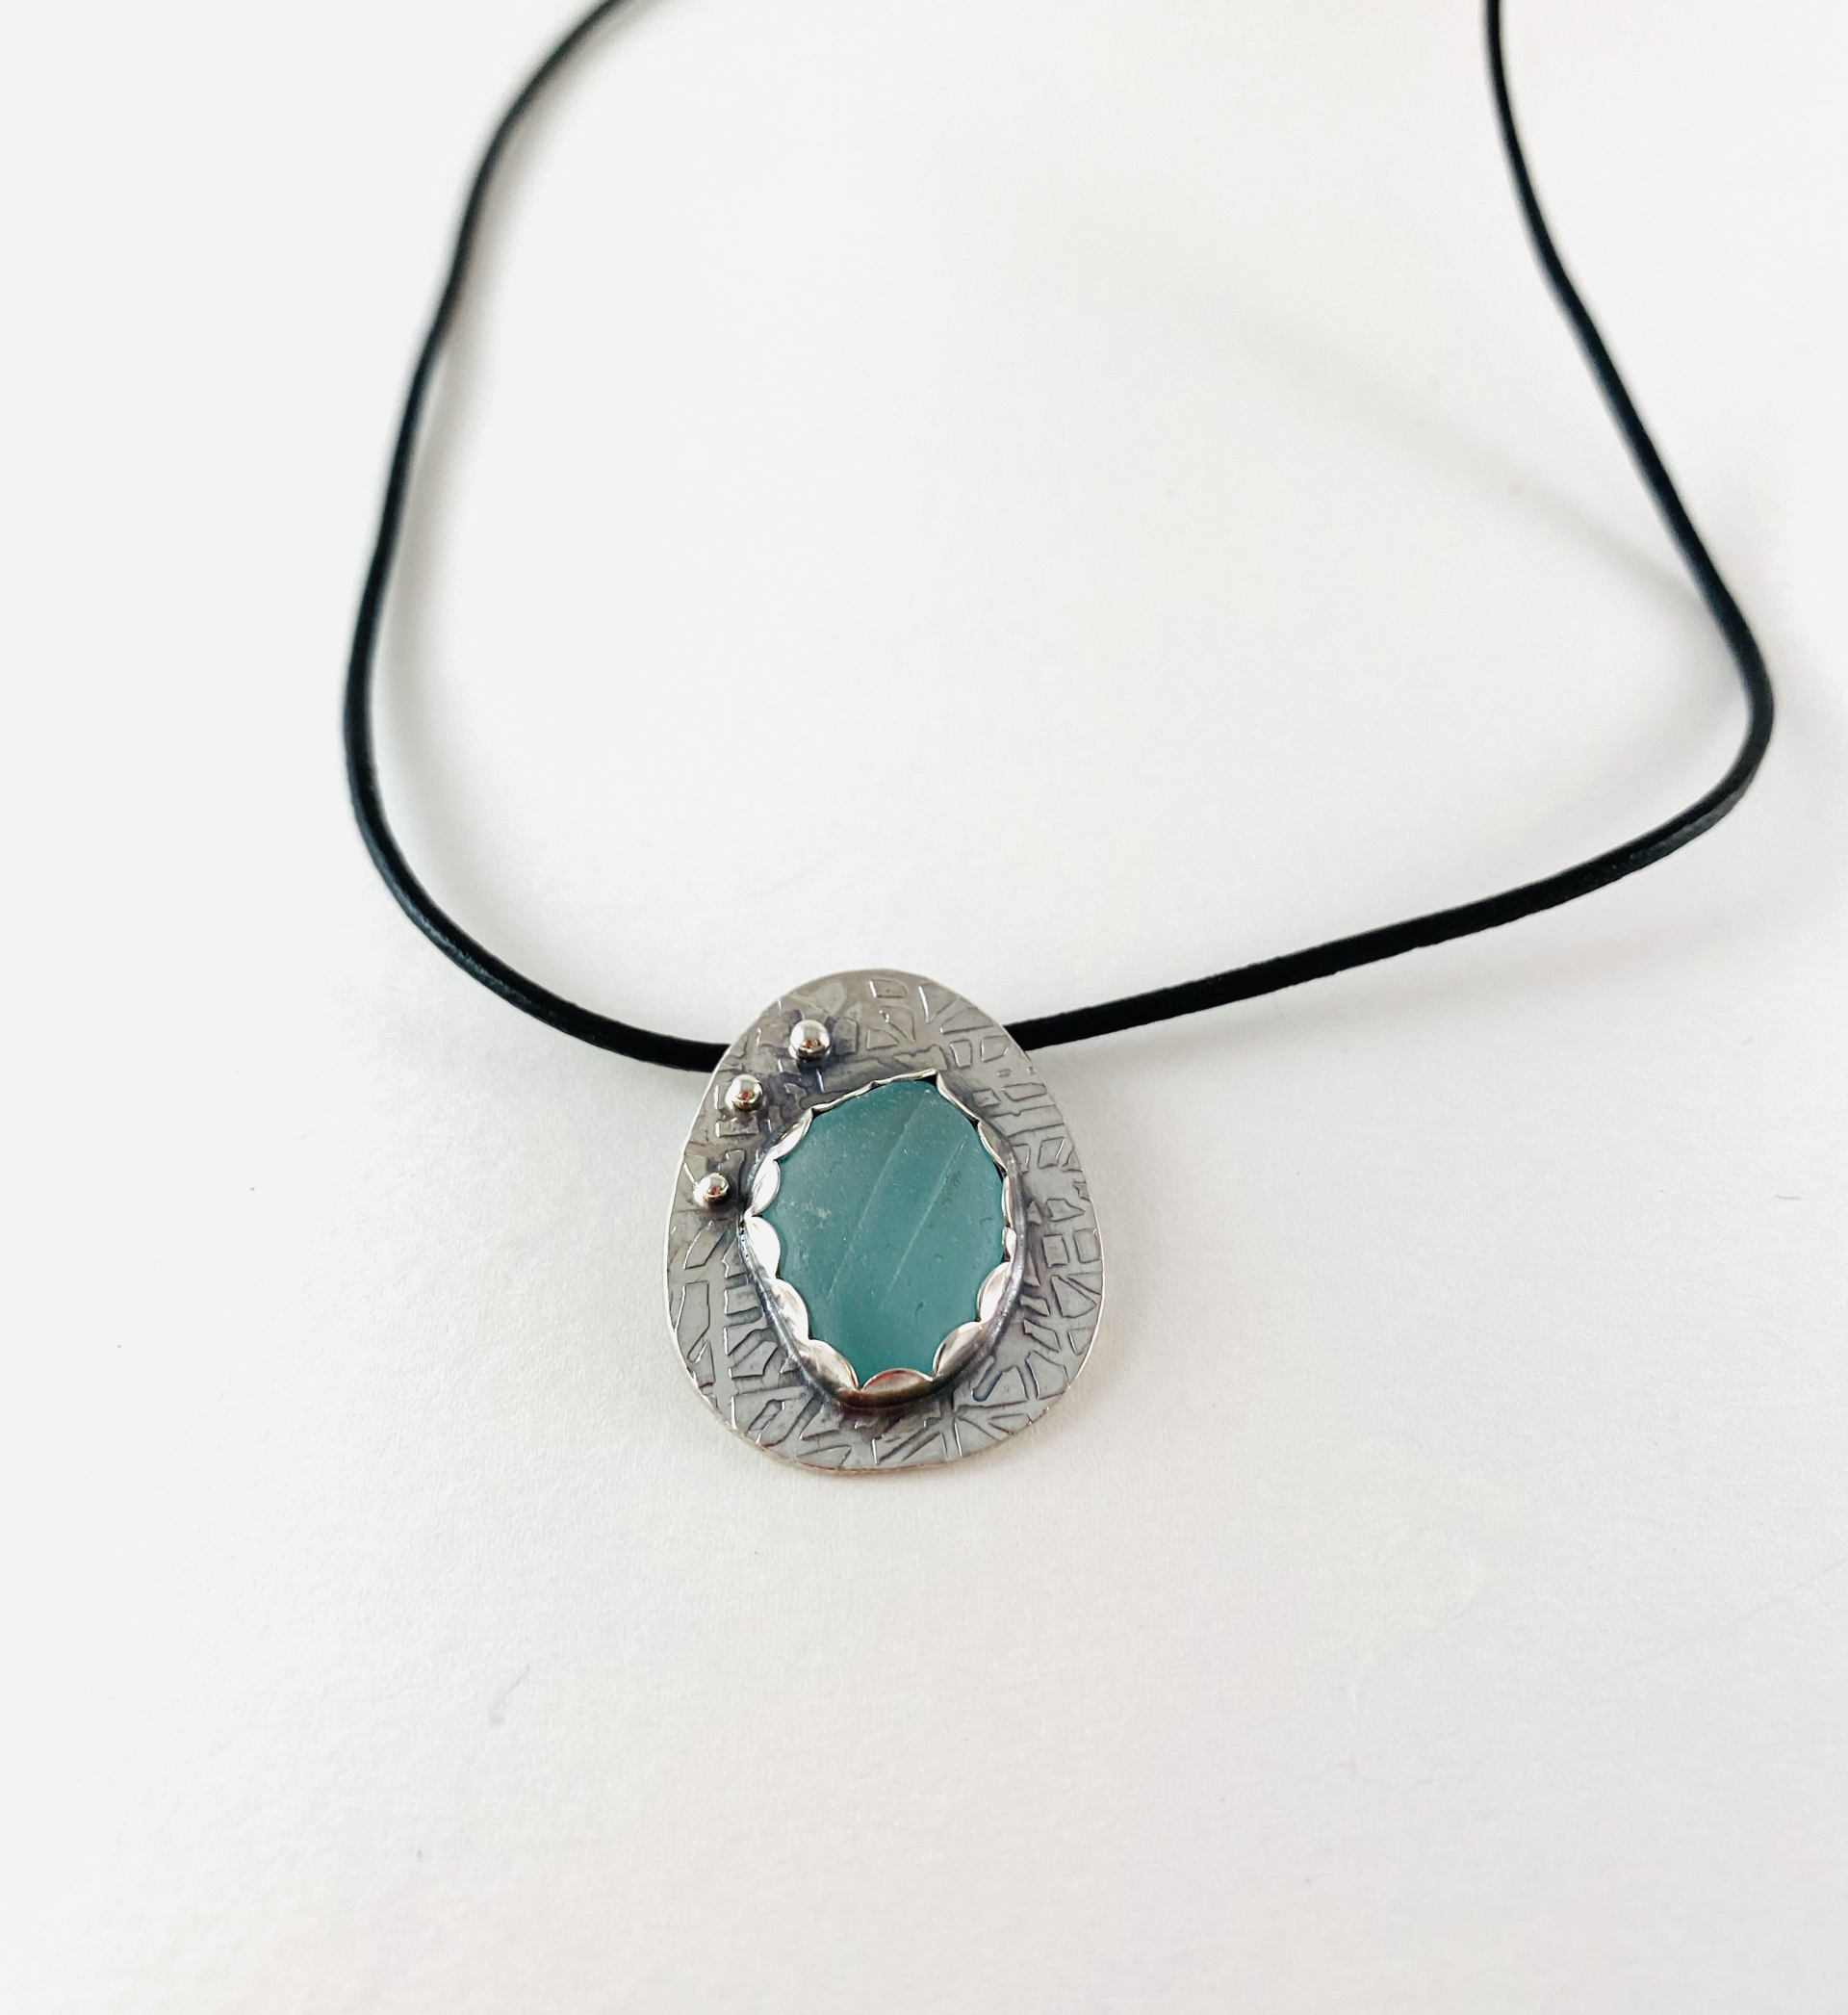 Silver and Sea Glass Pendant on leather cord by Anne Bivens